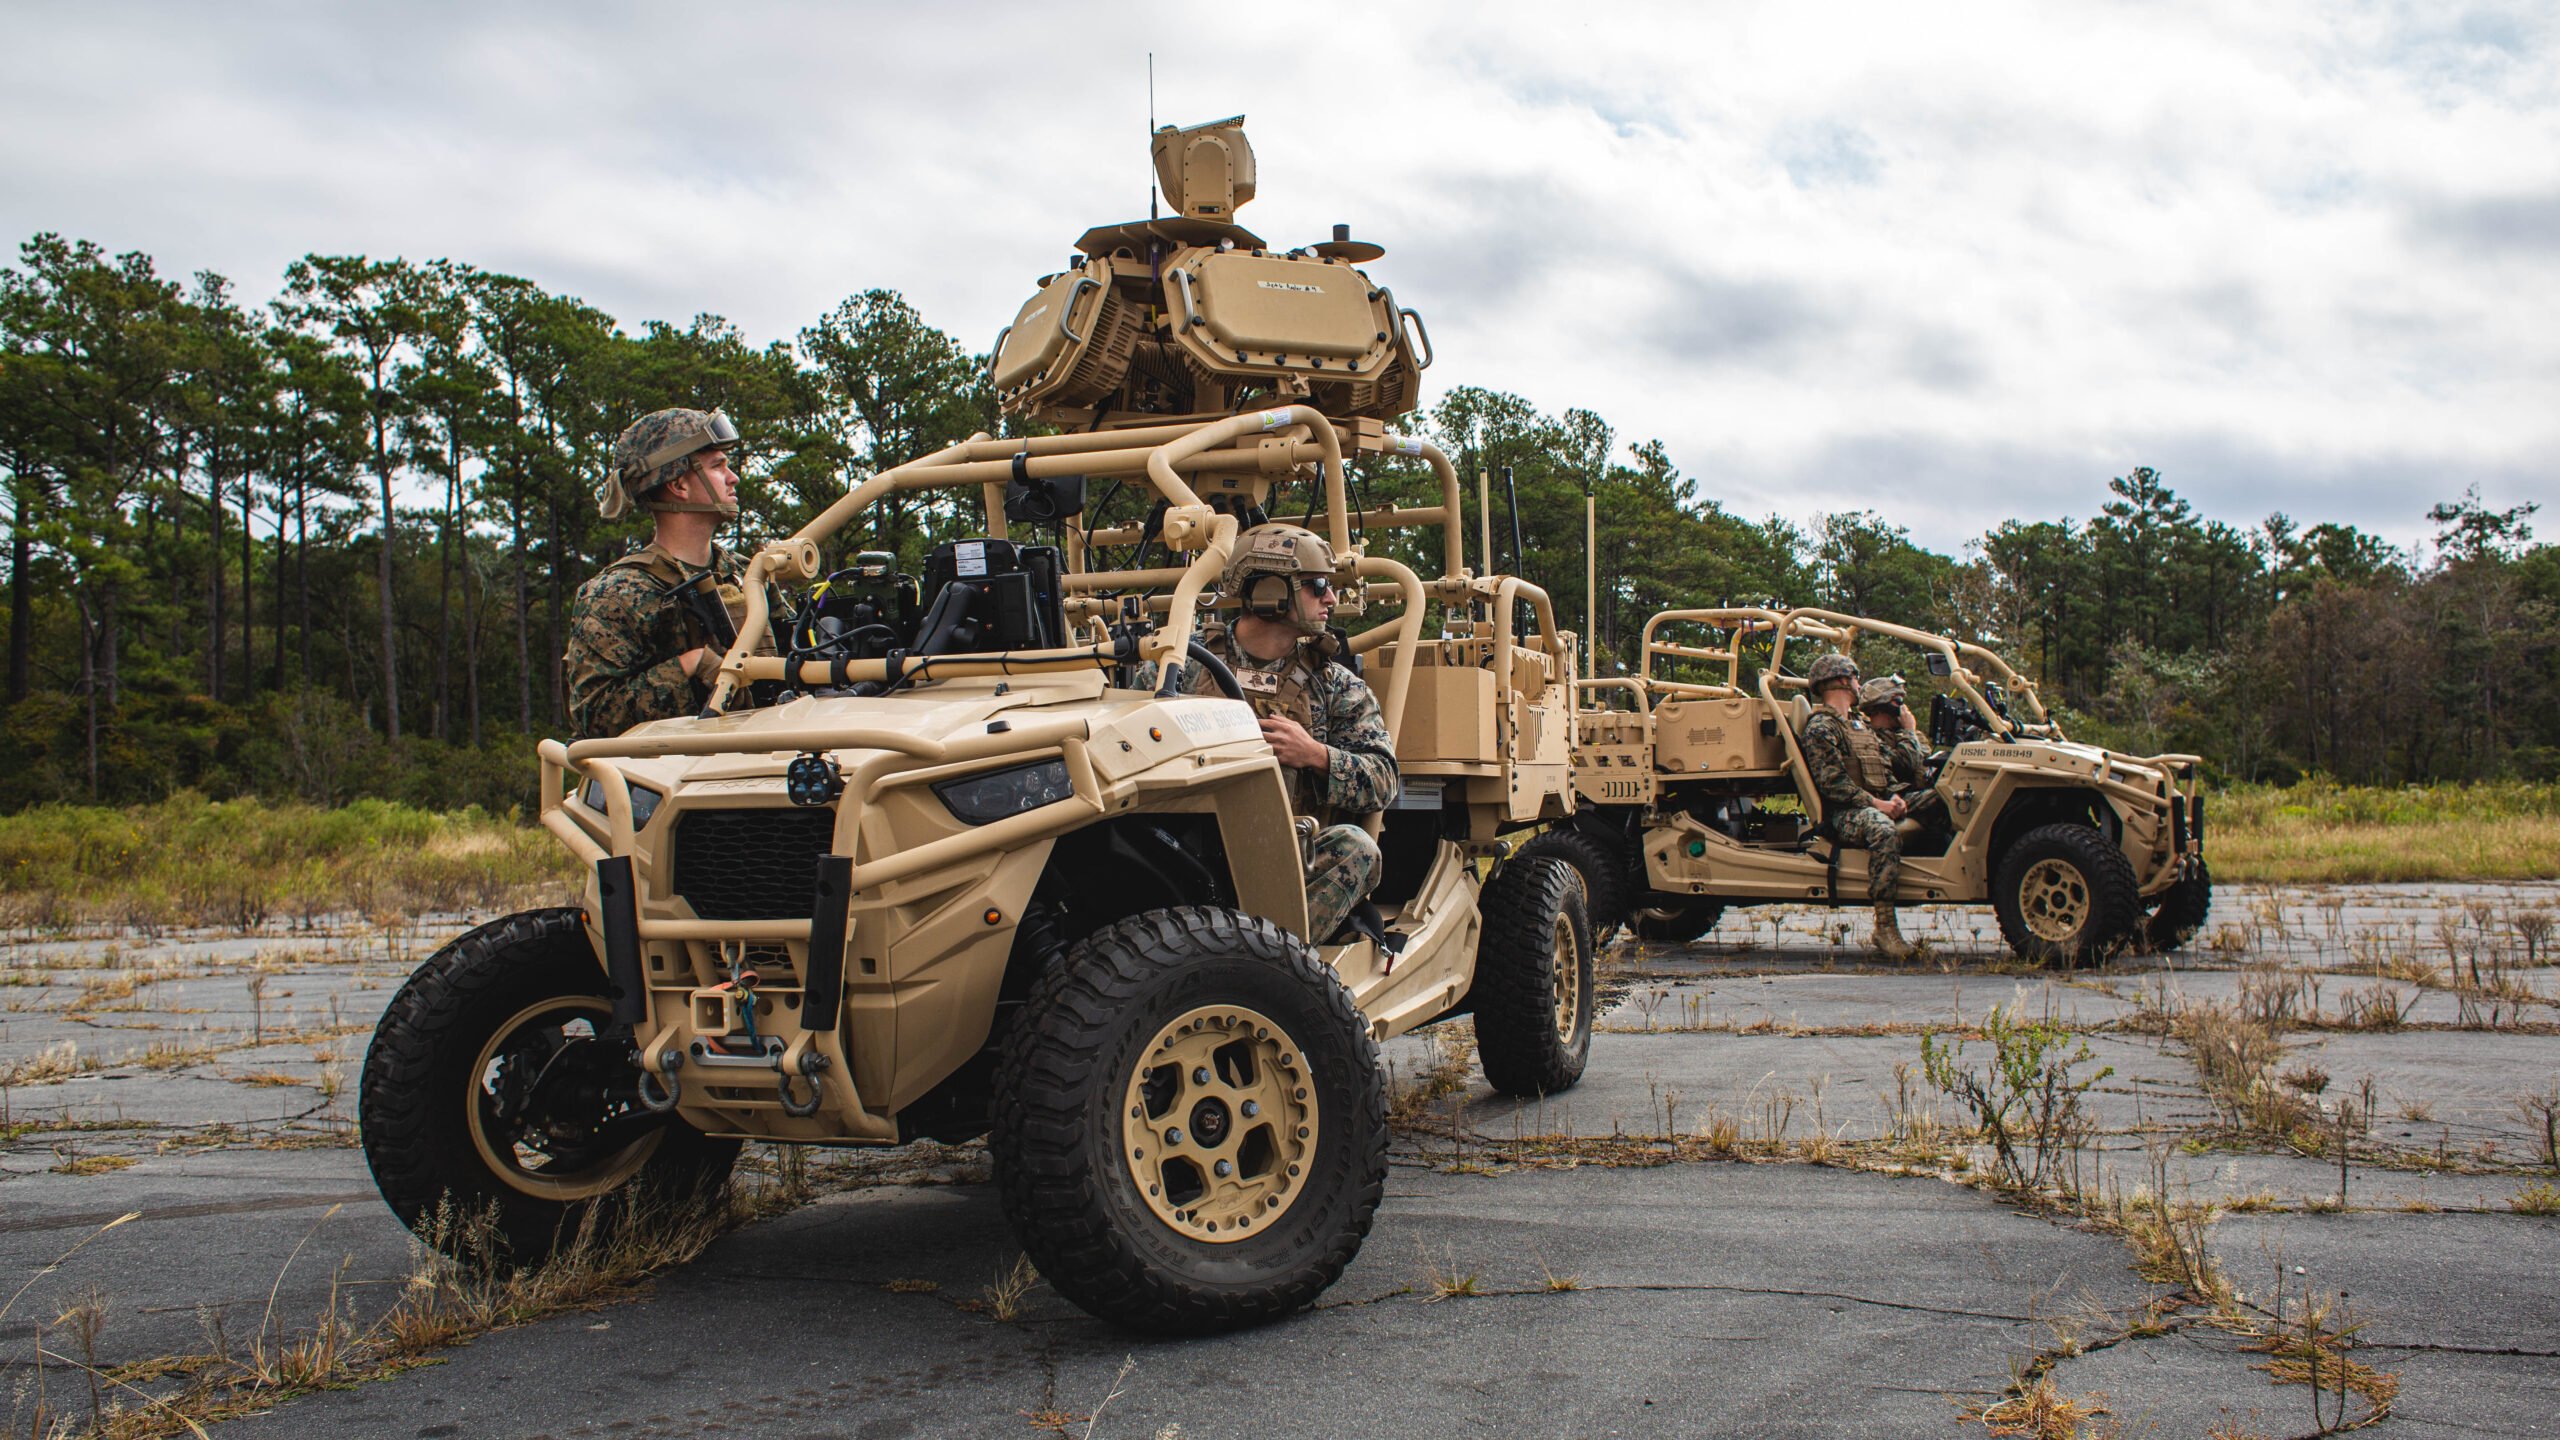 USMC's groundbased air defense focusing on quick rollouts, official